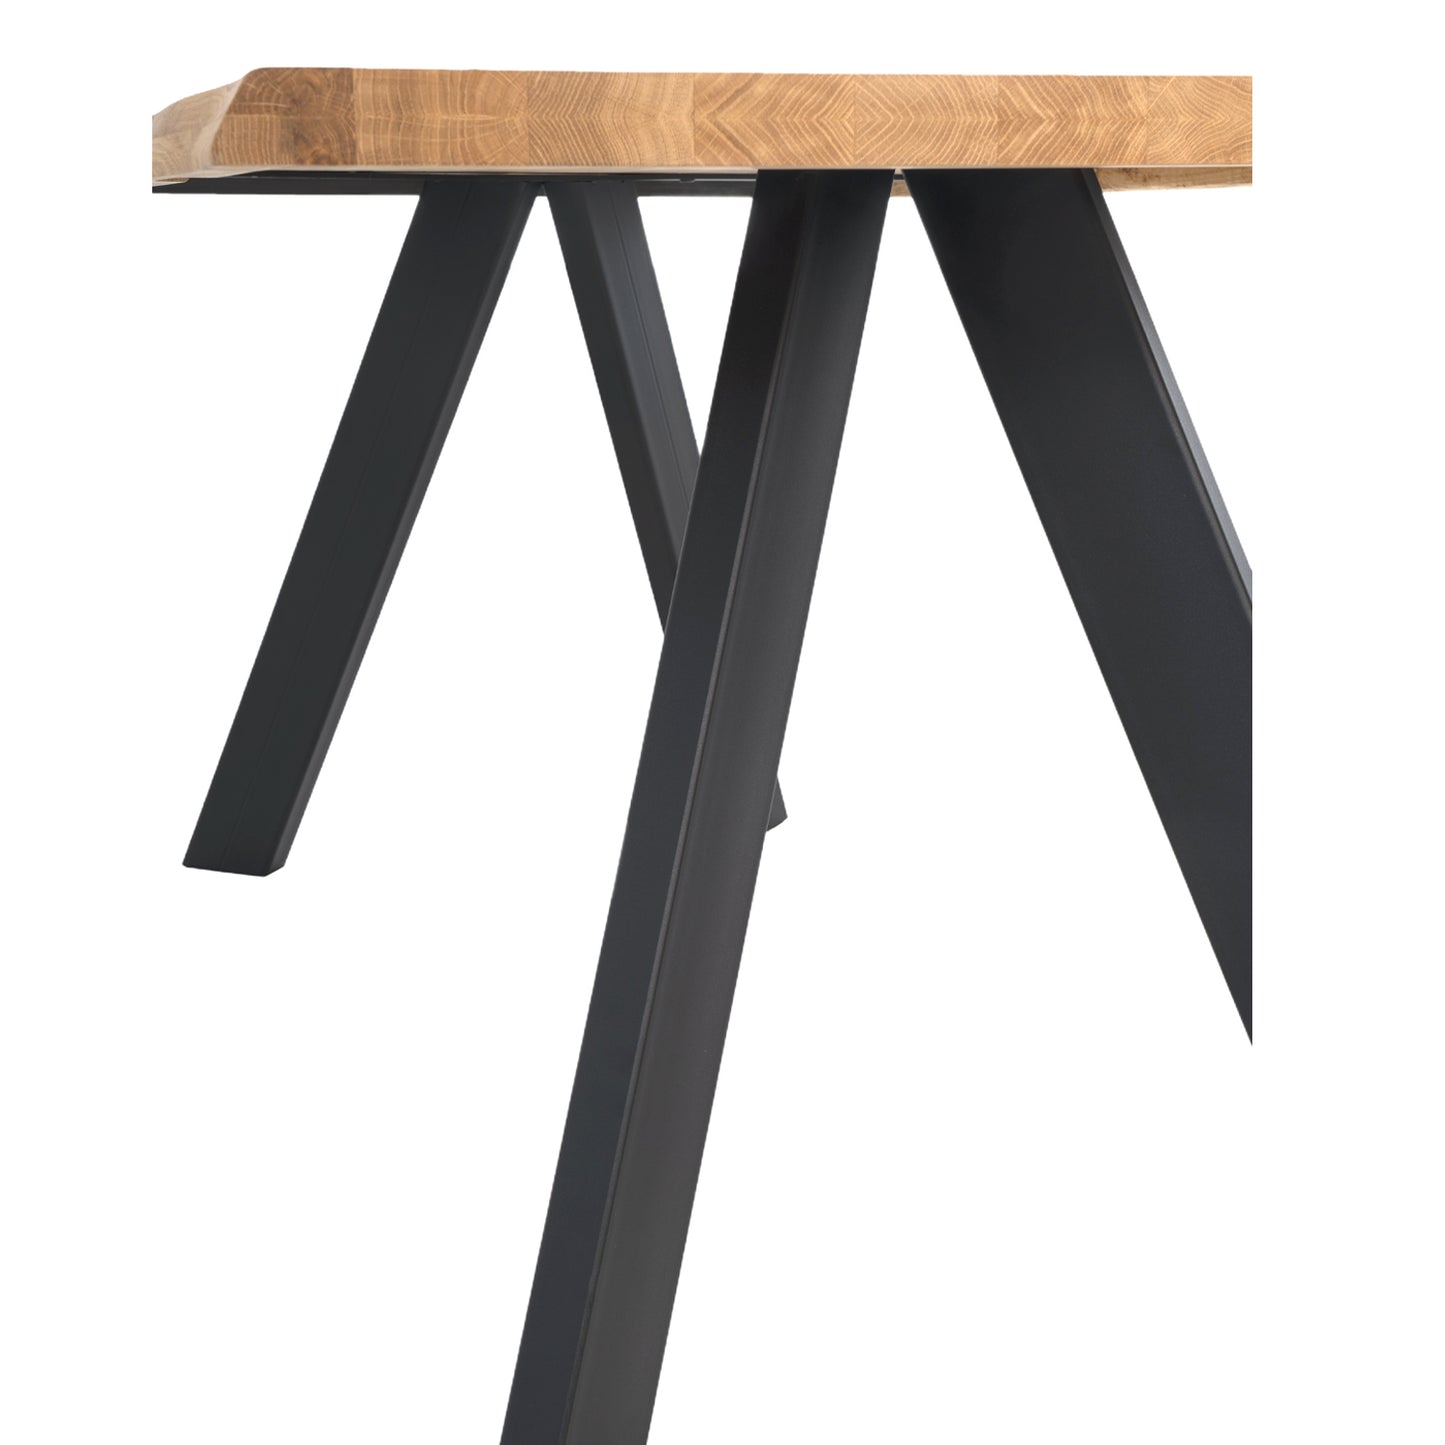 Lucina dining table